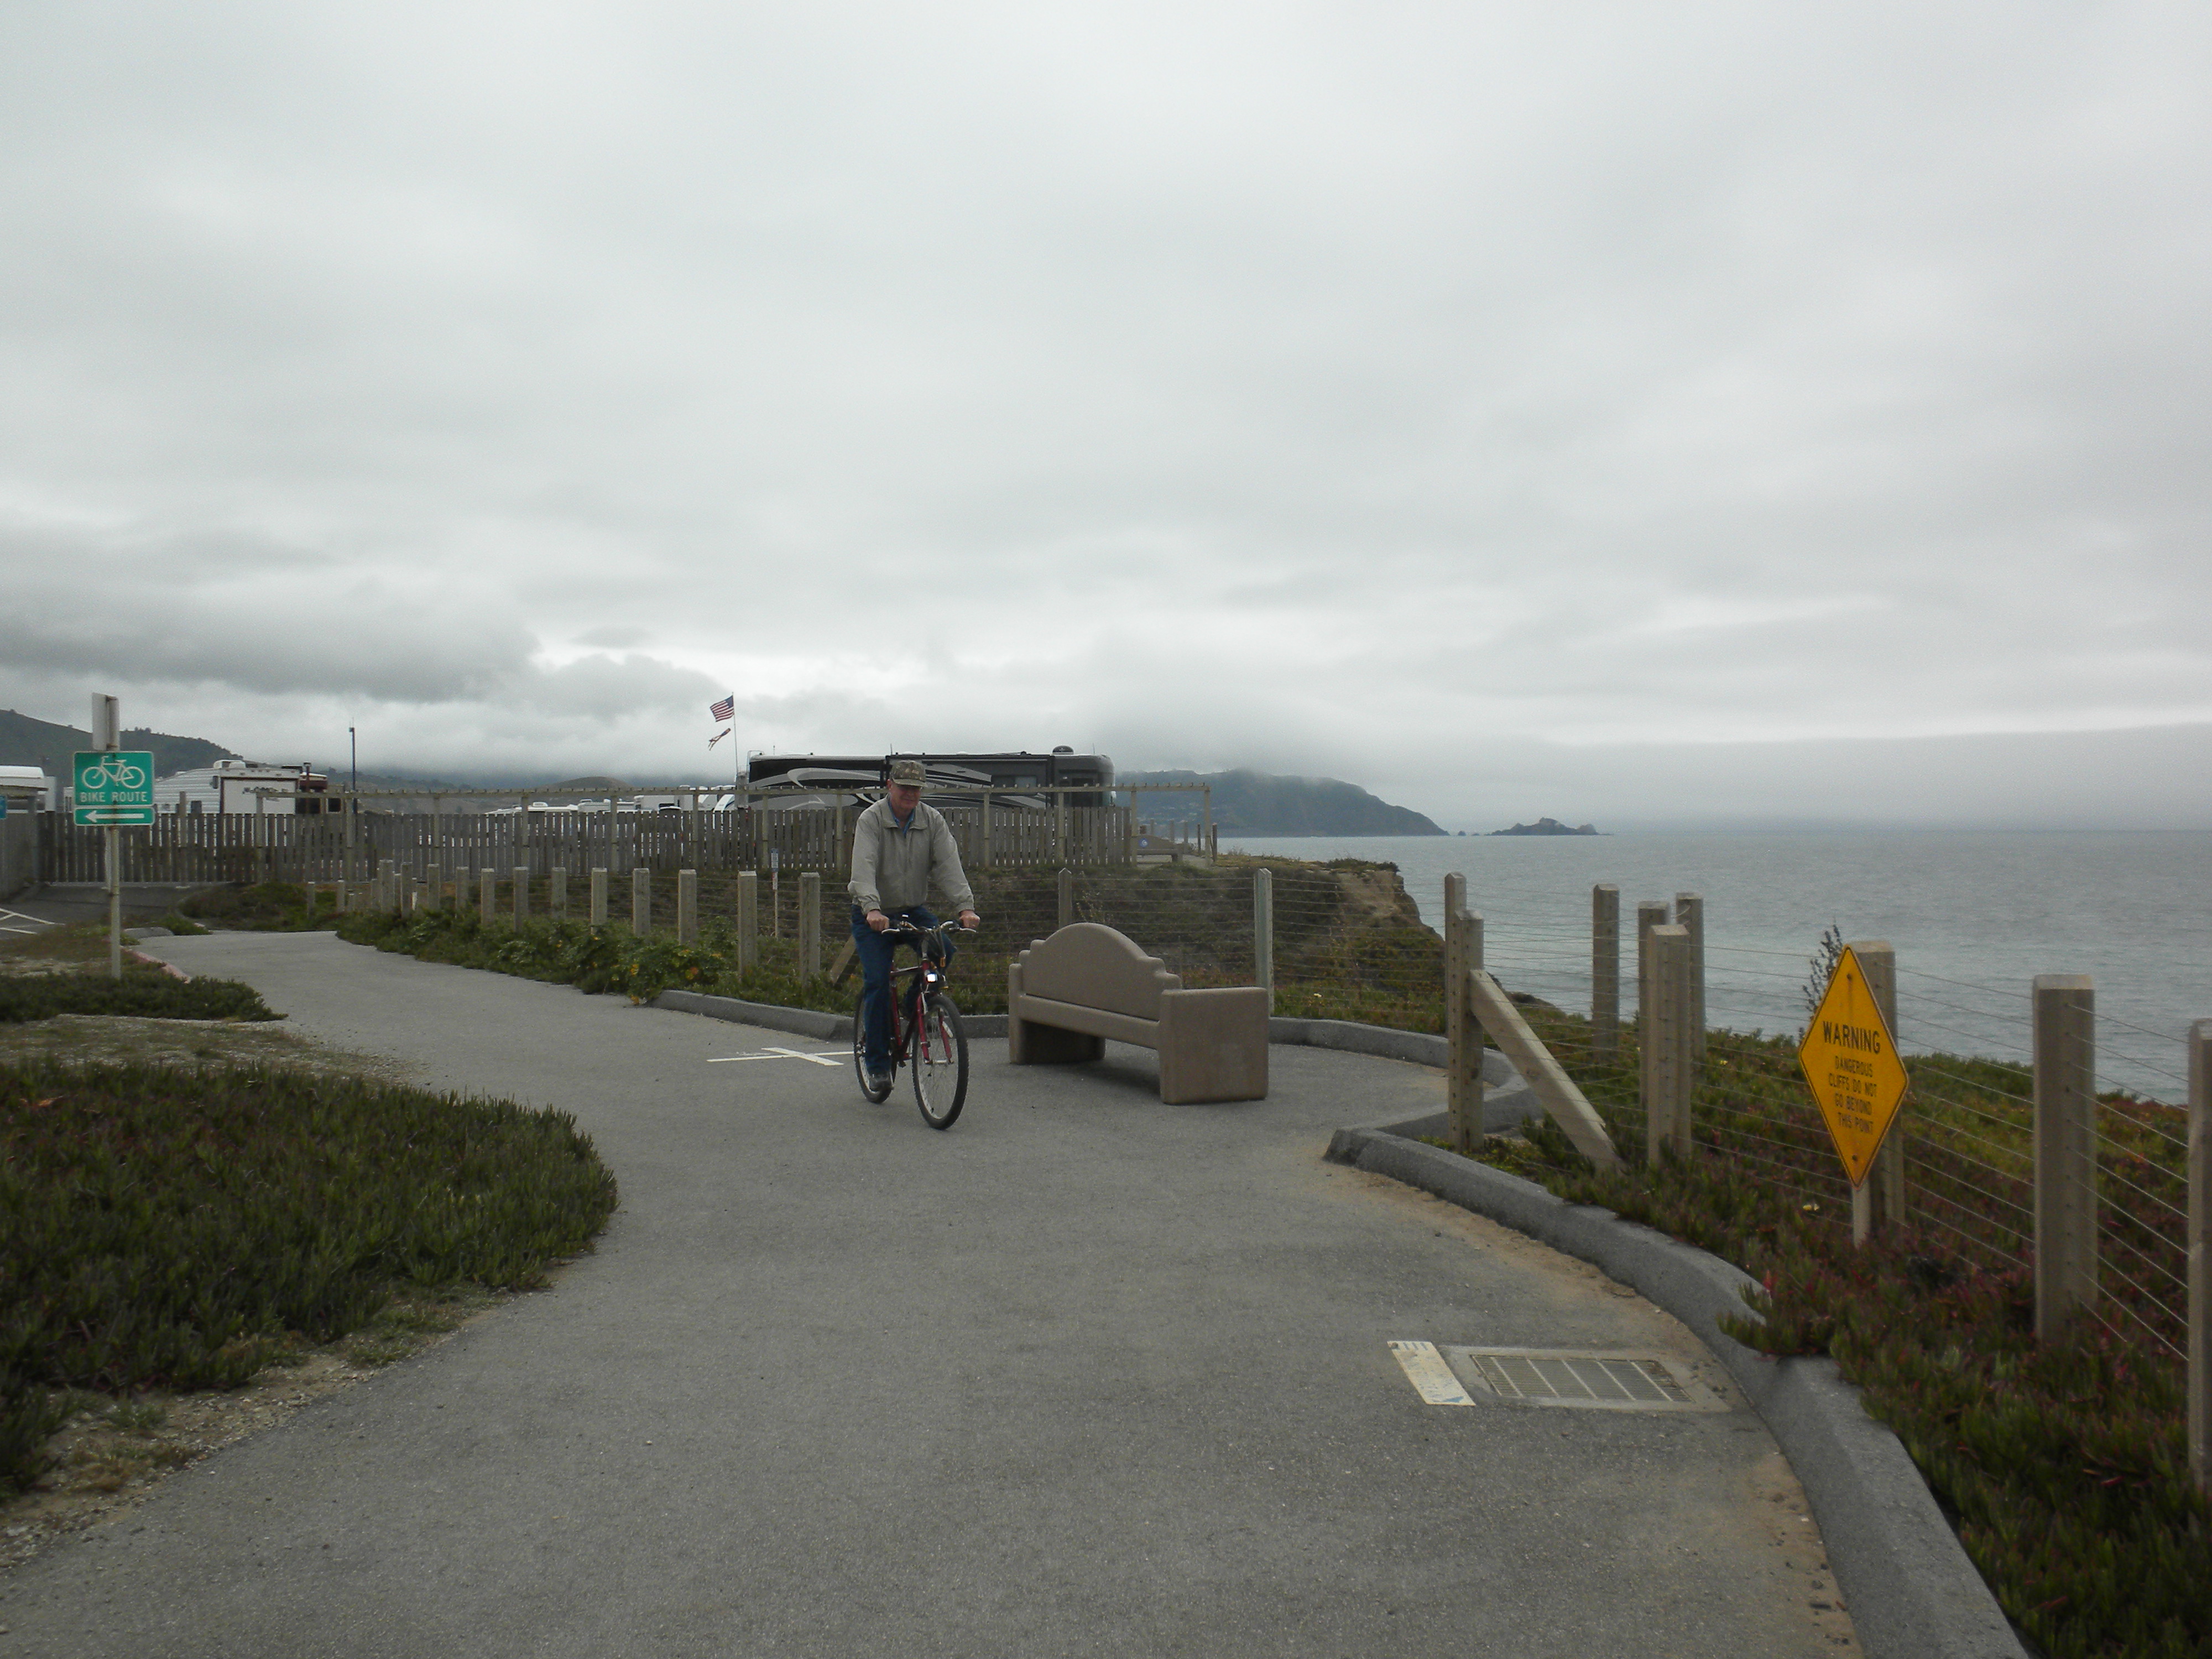 Riding to Pacifica